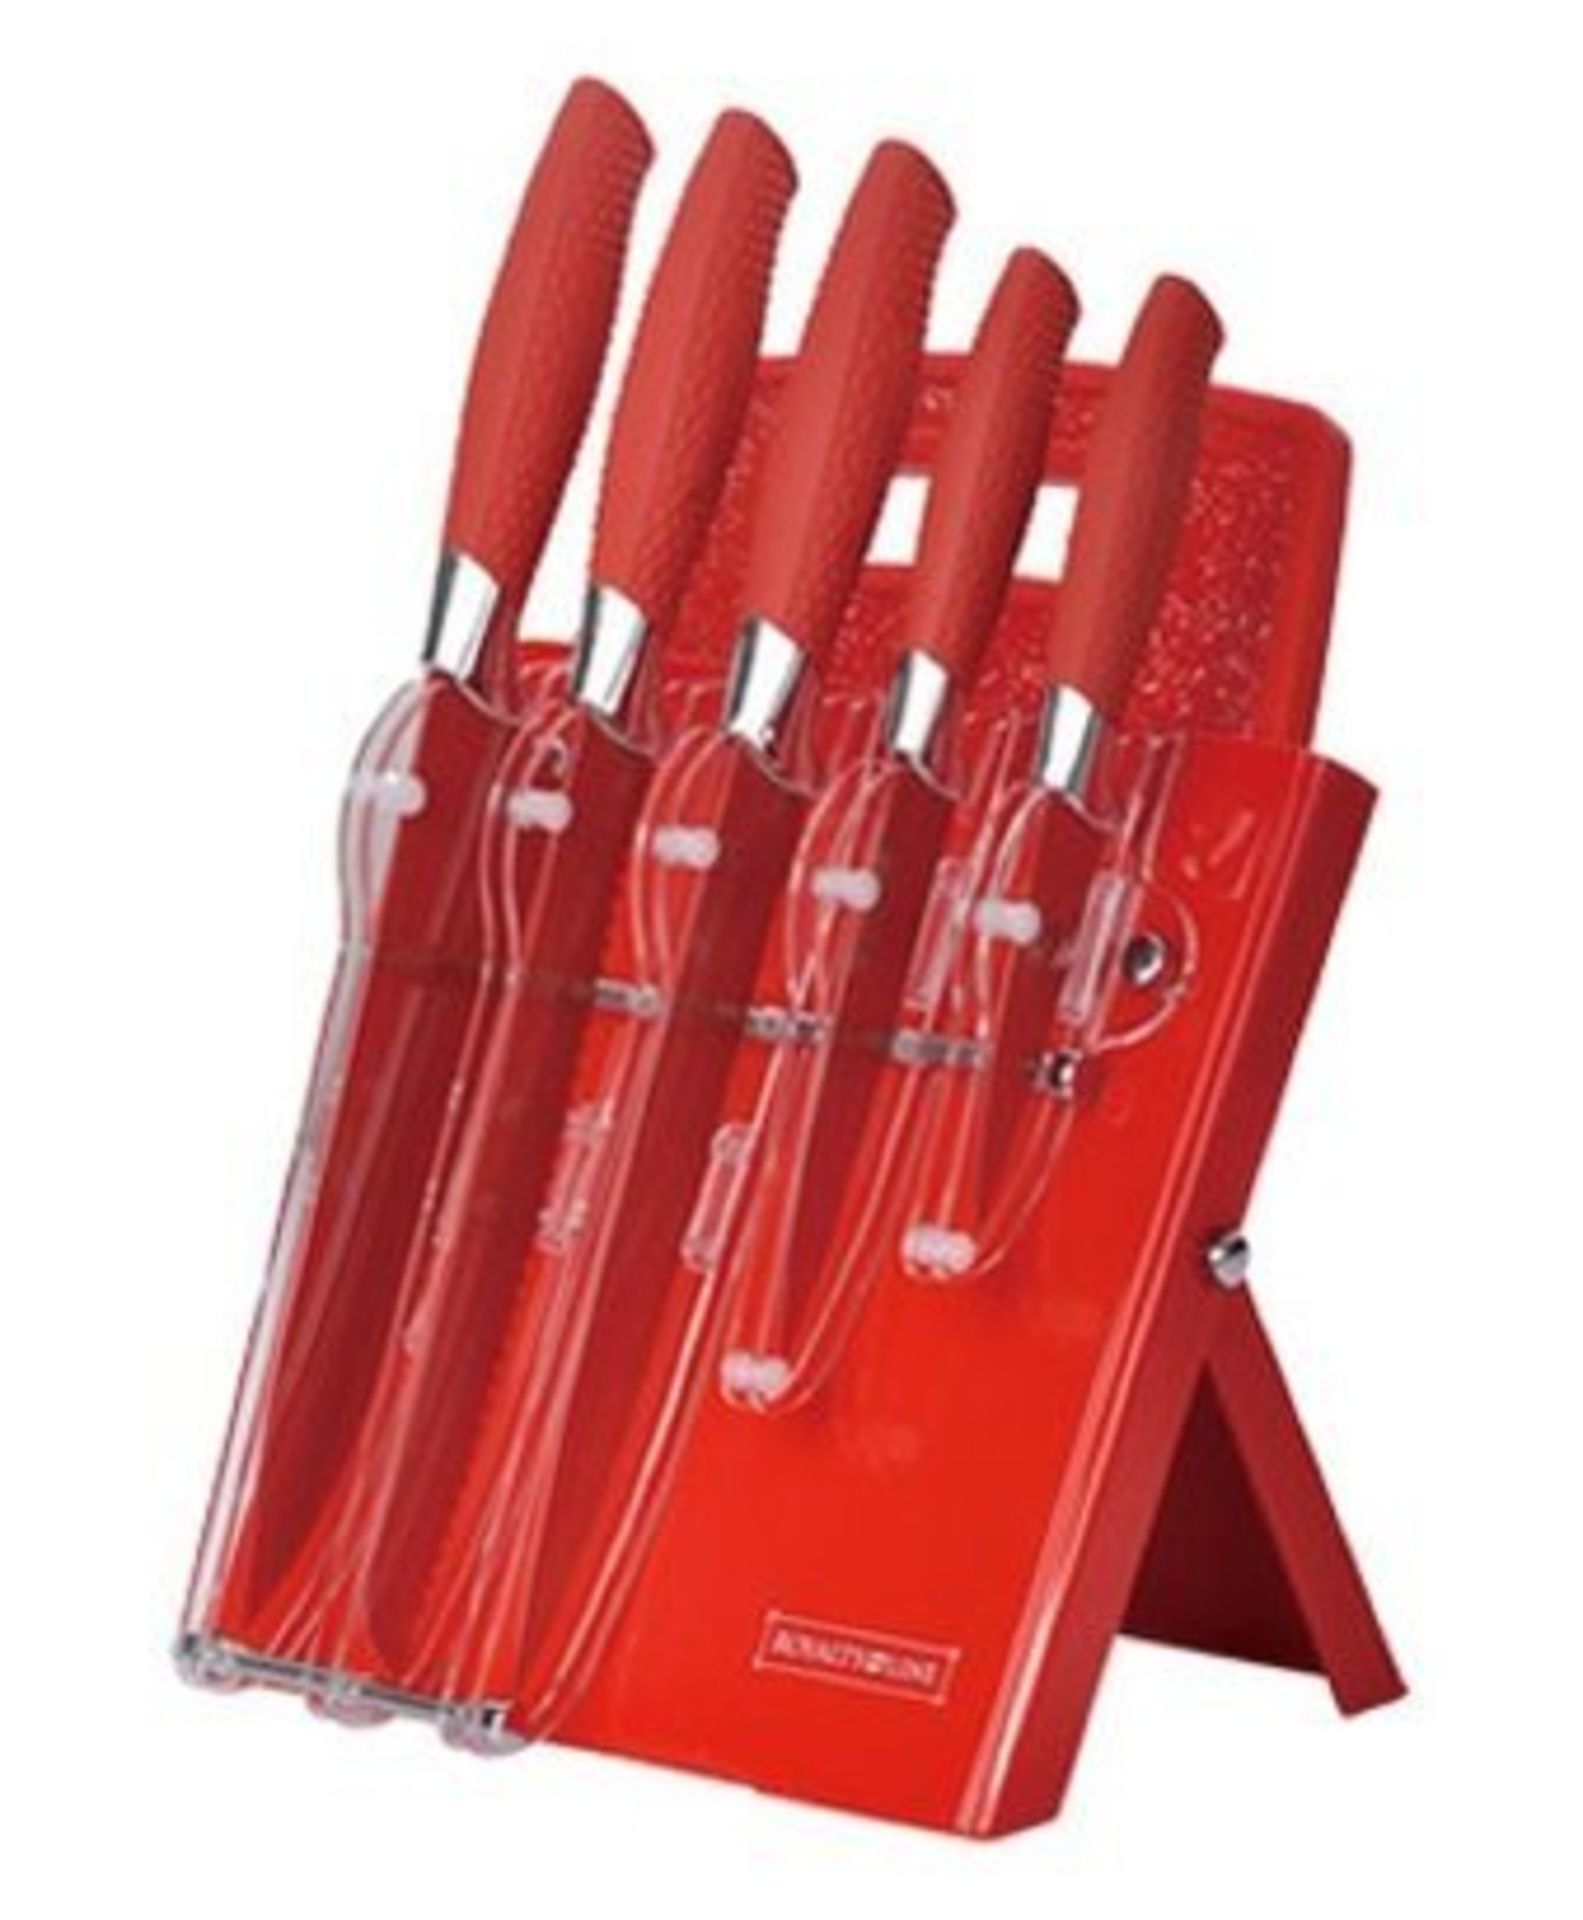 V Grade A 7 piece Non Stick Anti Bacterial Professional Knife Set With Acrylic Stand RRP159 Euros